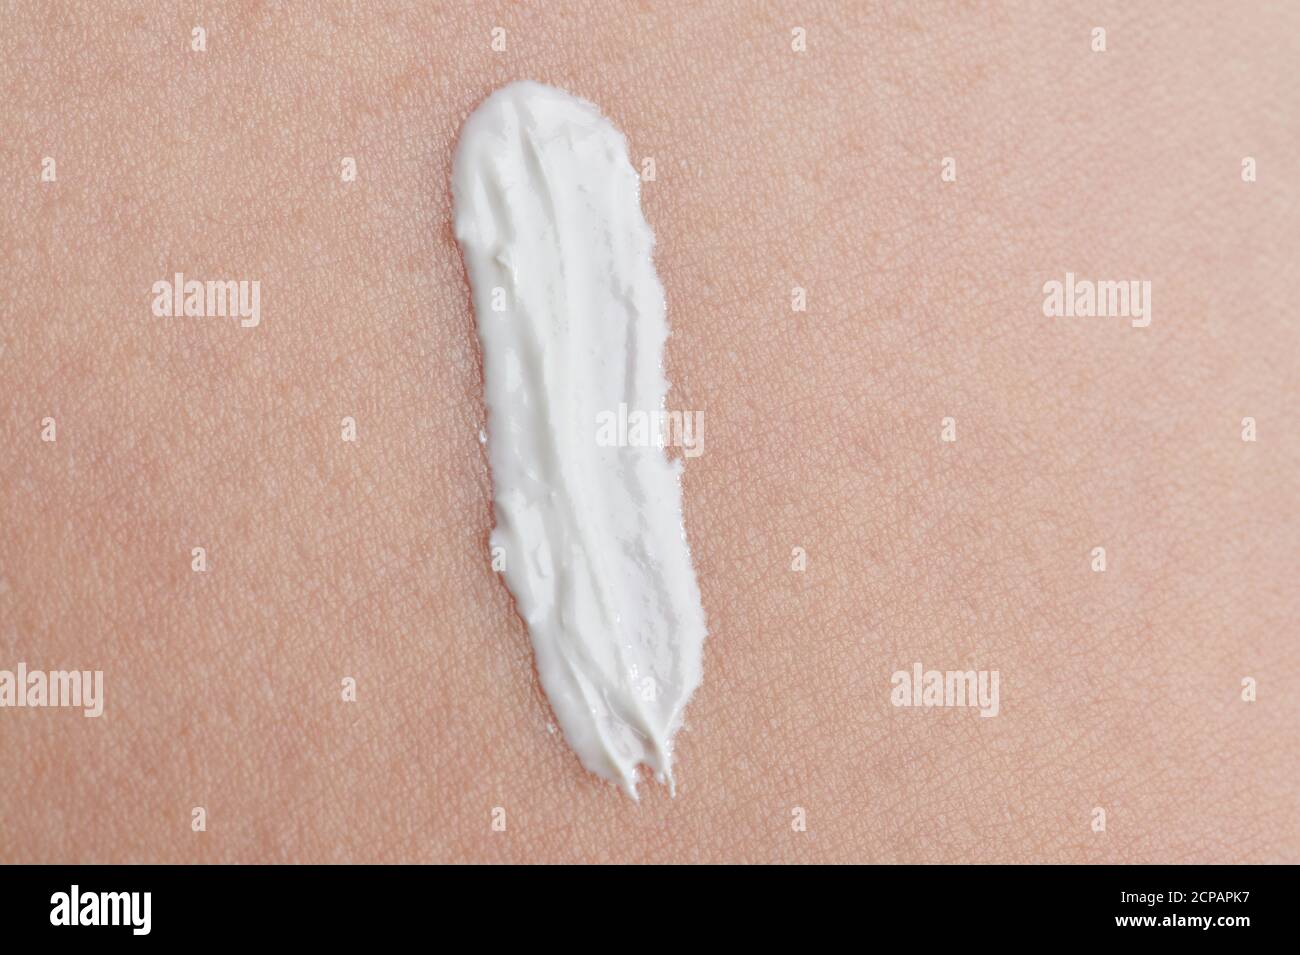 White skin cream line on clean baby face background Stock Photo